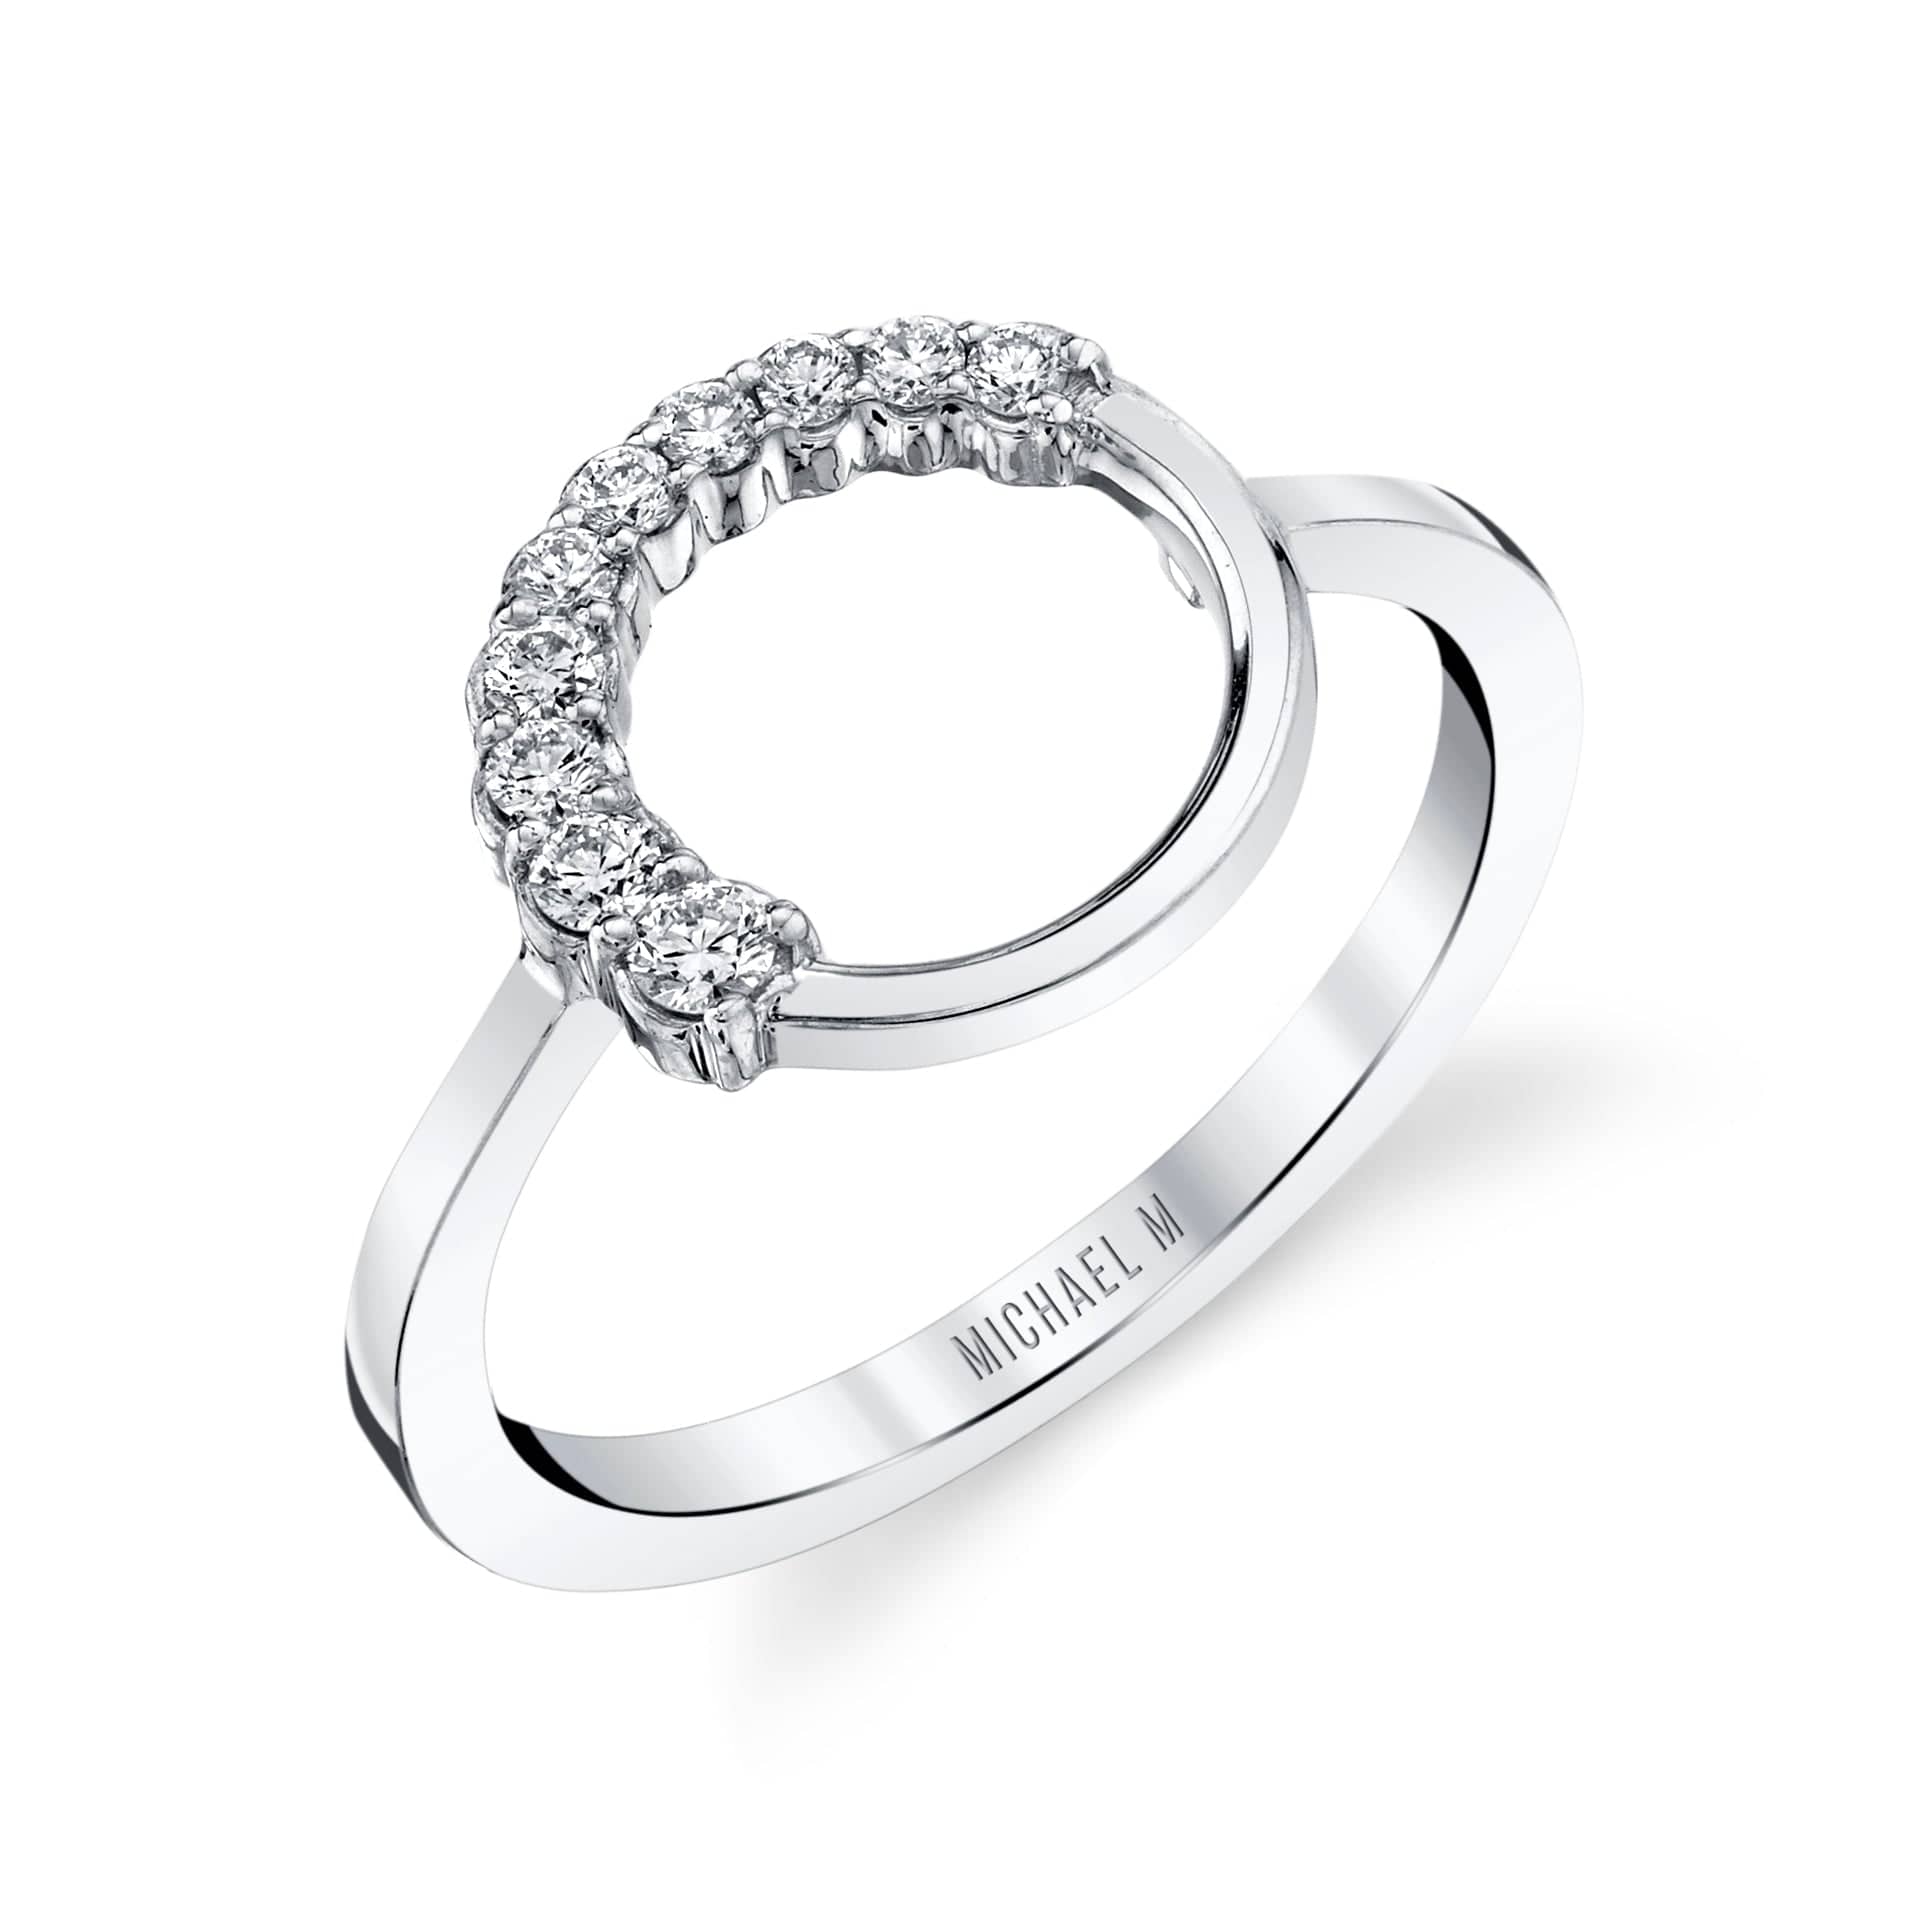 Double Bar Diamond Ring – Michael and Son's Jewelers